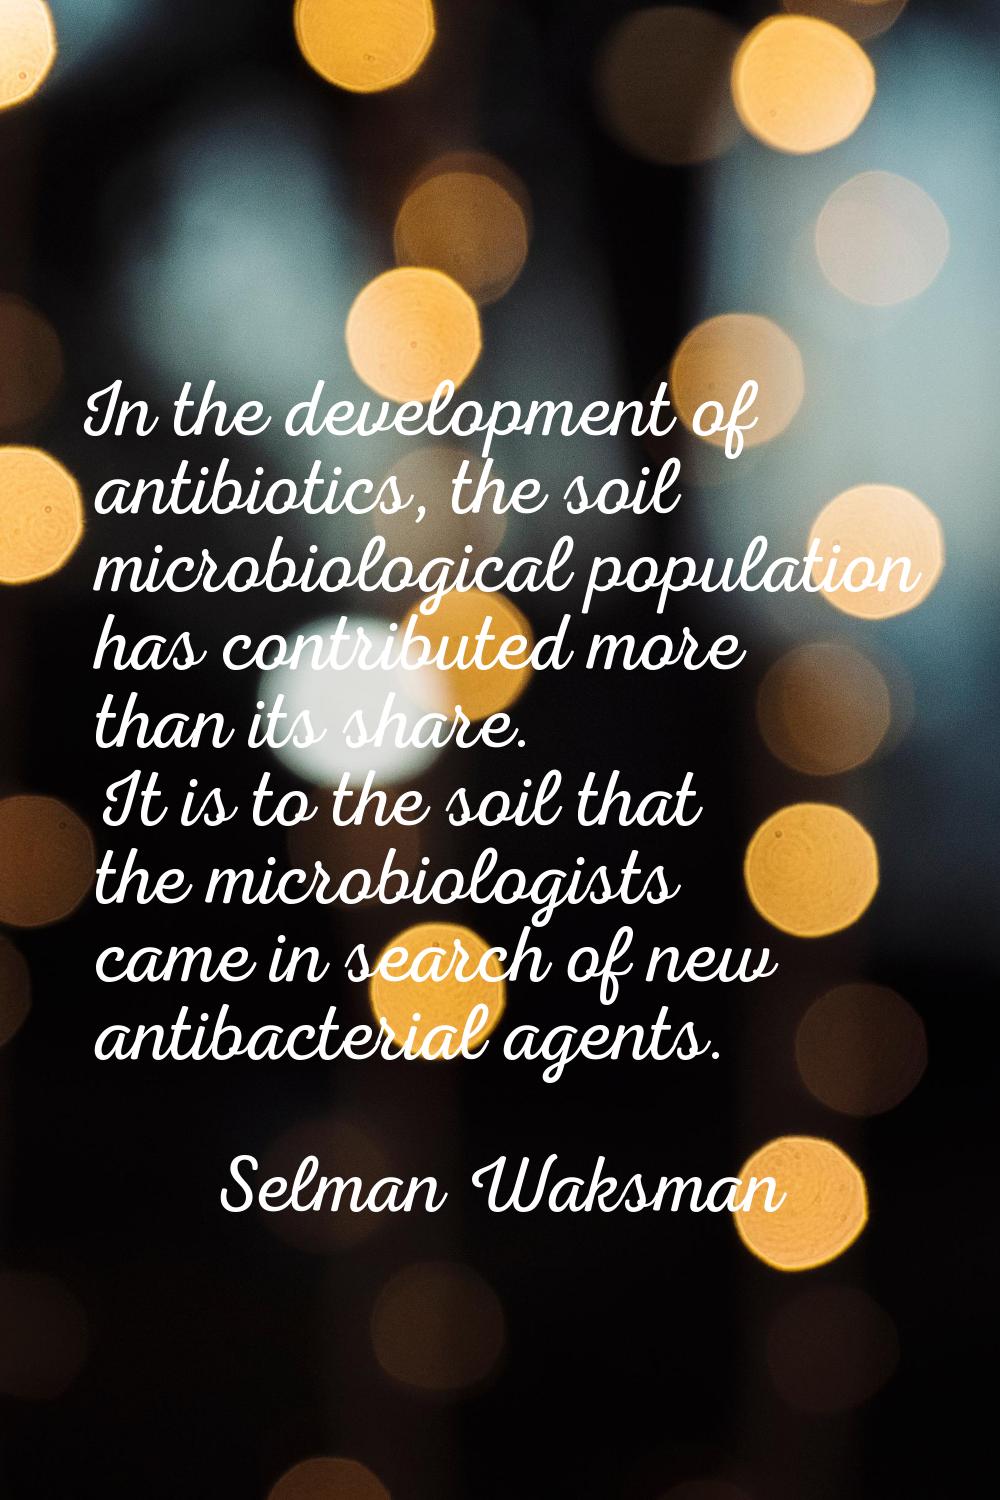 In the development of antibiotics, the soil microbiological population has contributed more than it